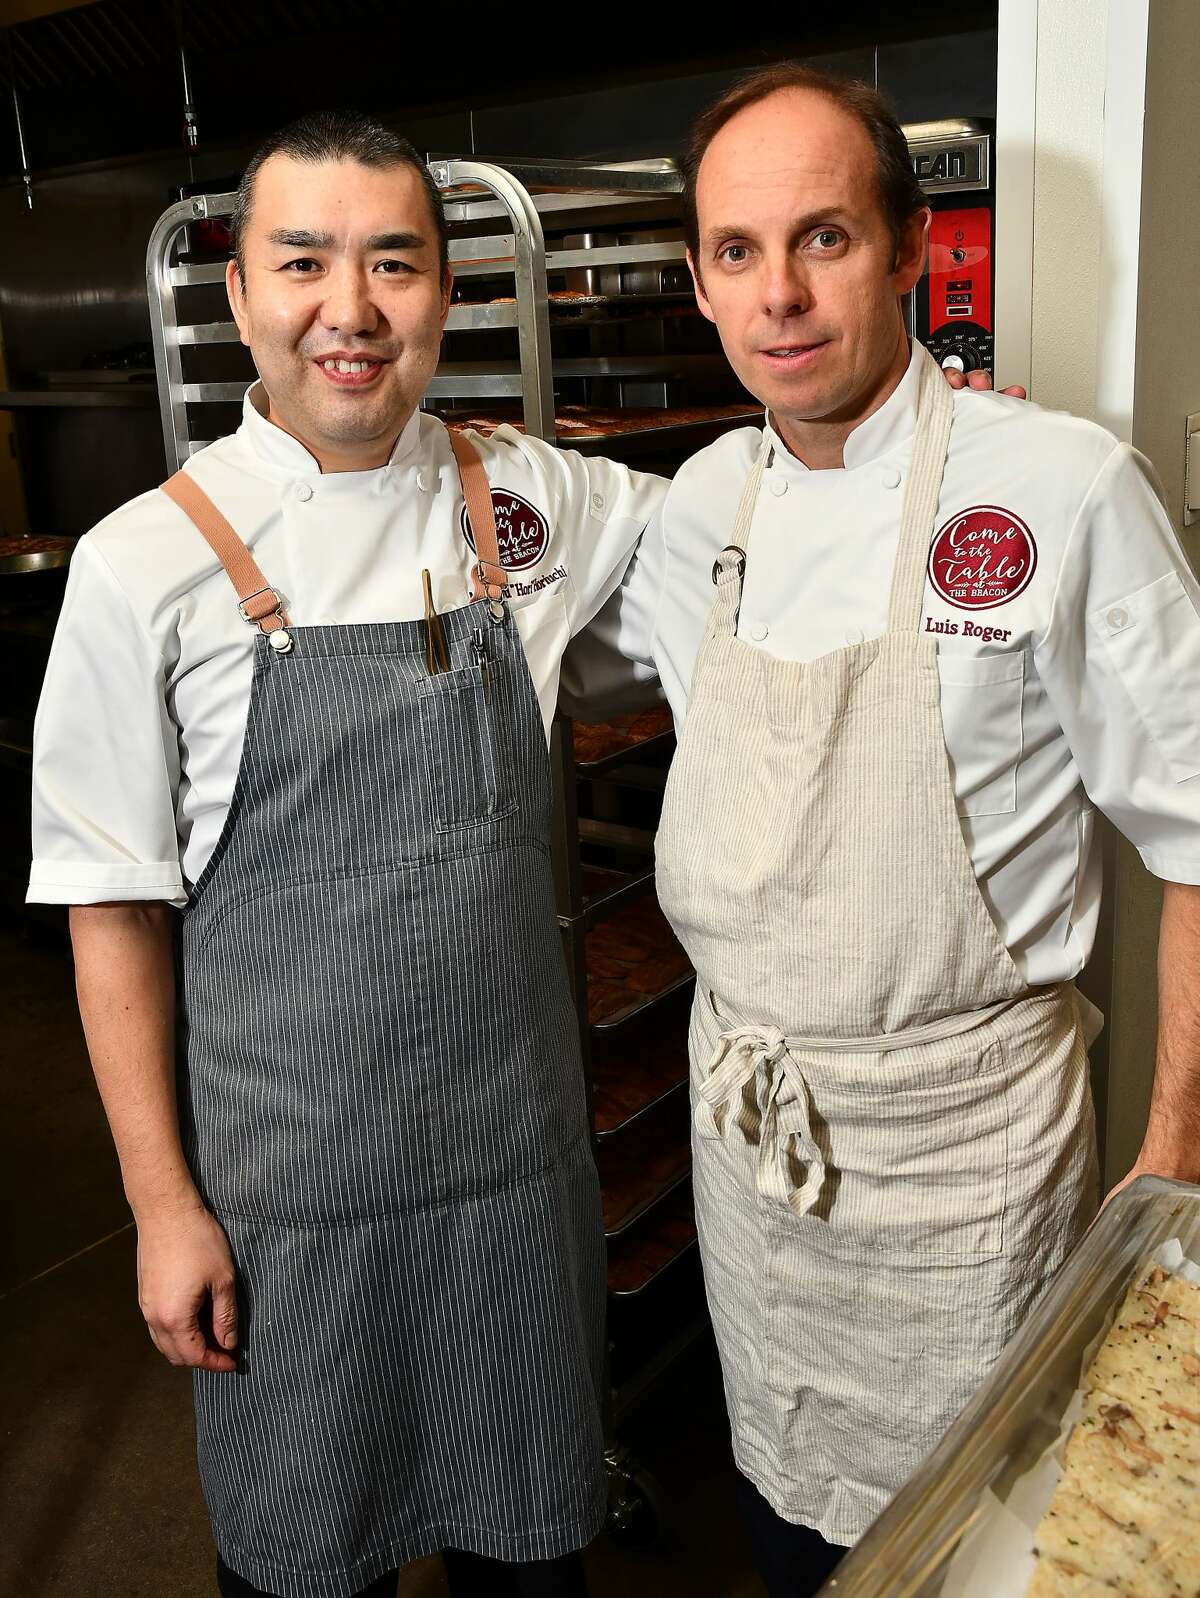 Chefs Manabu "Hori" Horiuchi and Luis Roger at the "Come to the Table" dinner benefiting The Beacon Tuesday Dec. 04,2019.